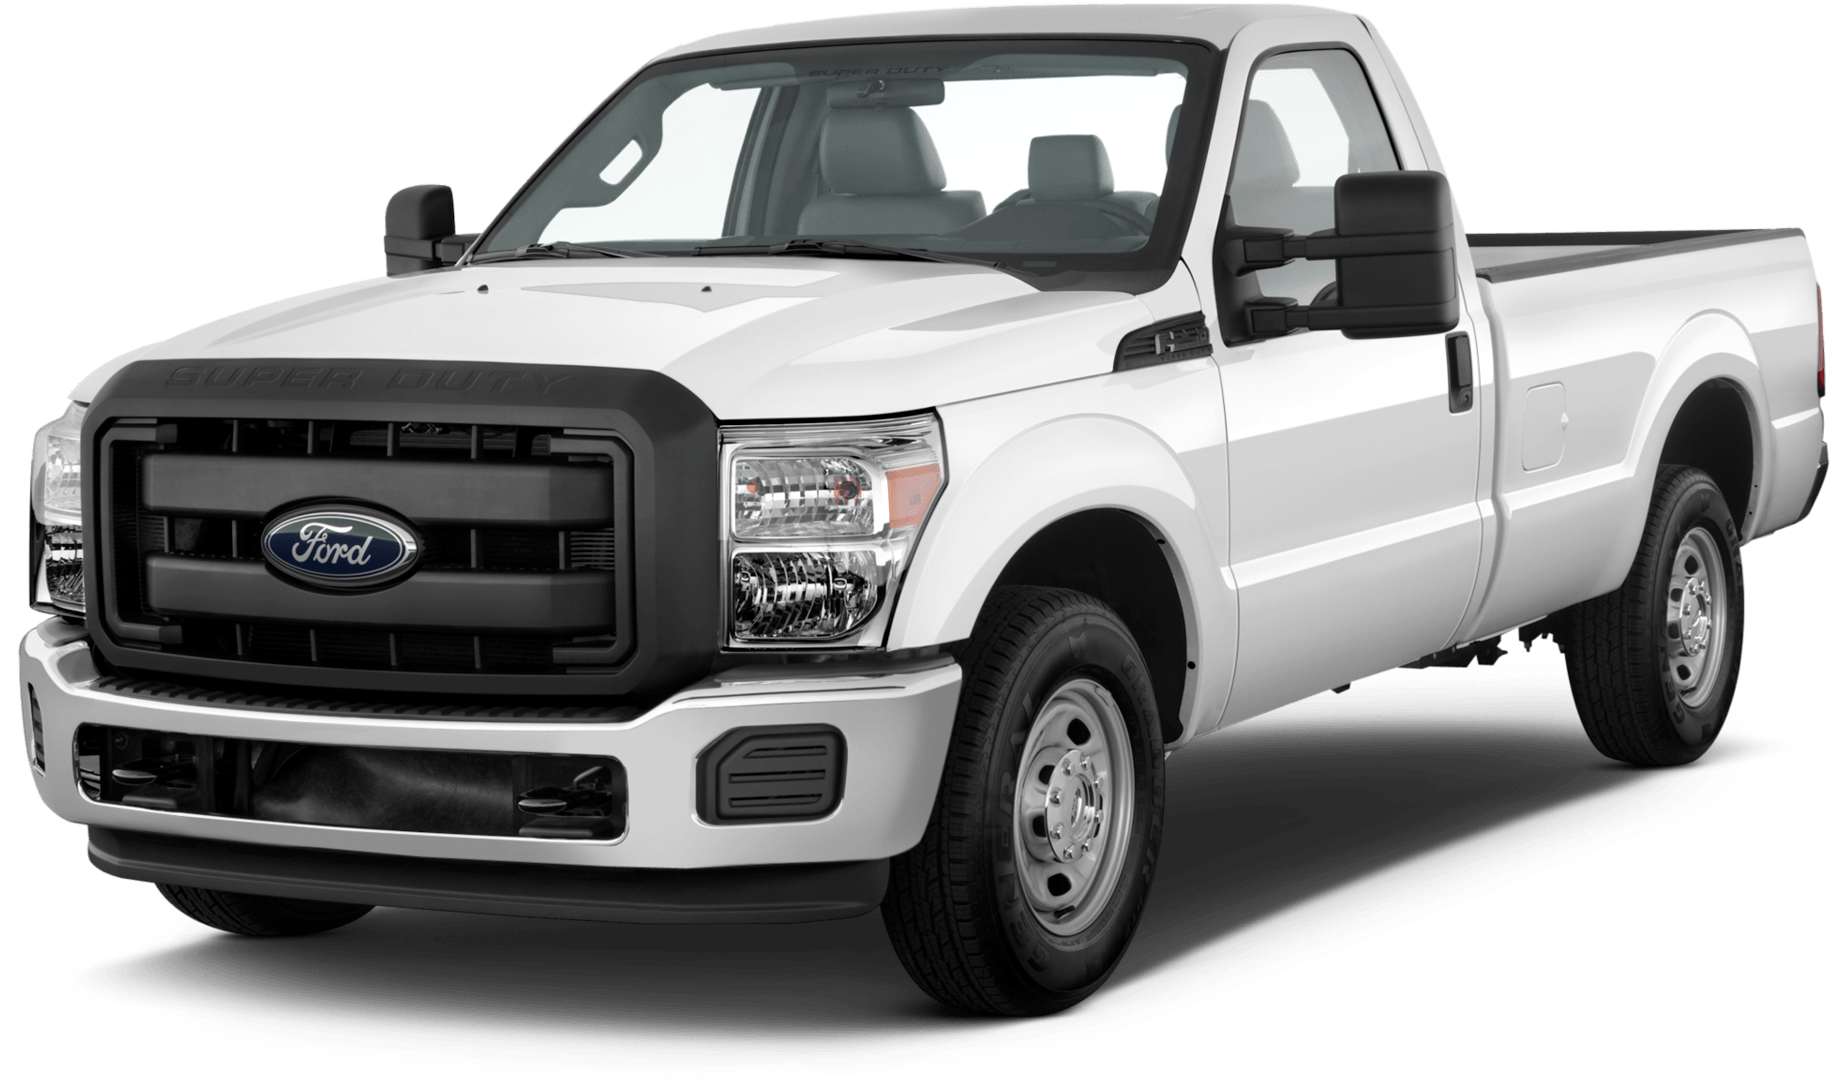 Used Ford Trucks Near Moose Jaw Bennett - 2017 Ford F 150 Work Truck (1920x1275), Png Download